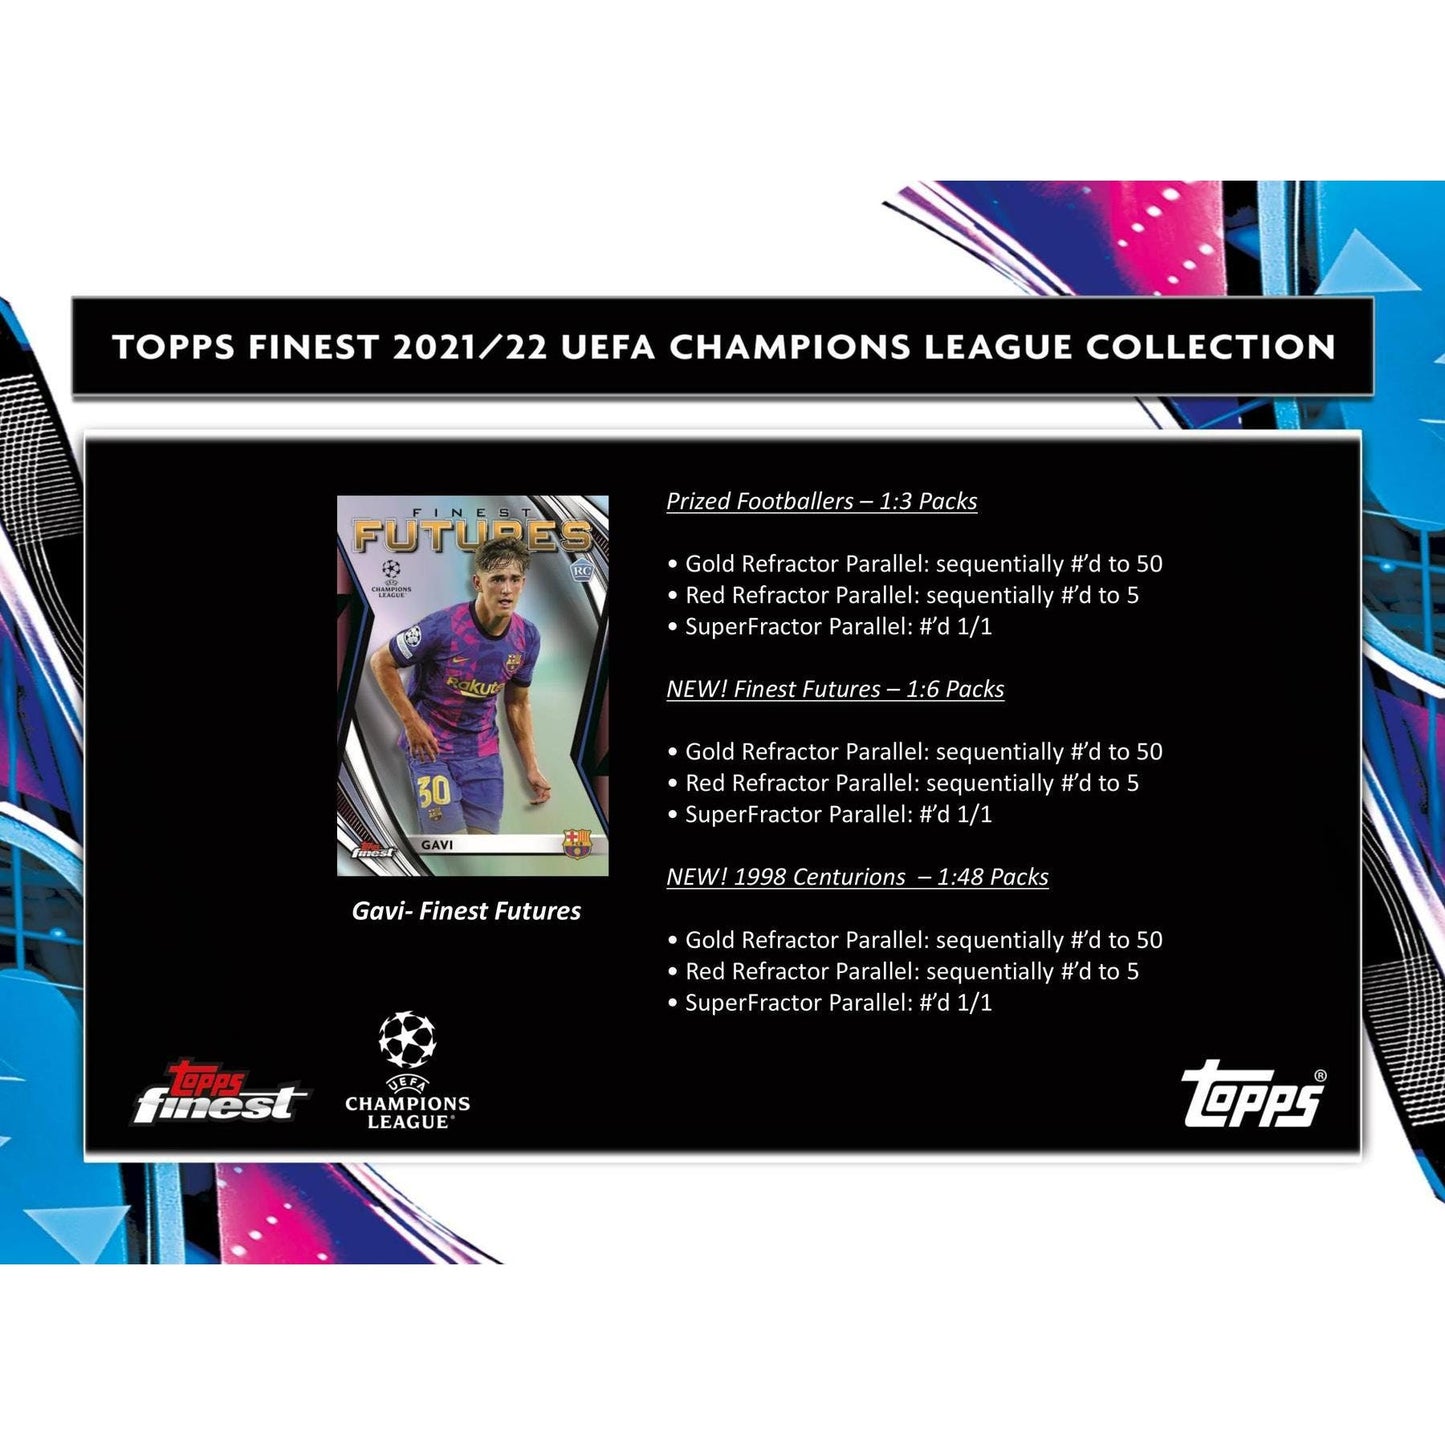 2021-22 Topps Finest UEFA Champions League Soccer Master Hobby Box - King Card Canada